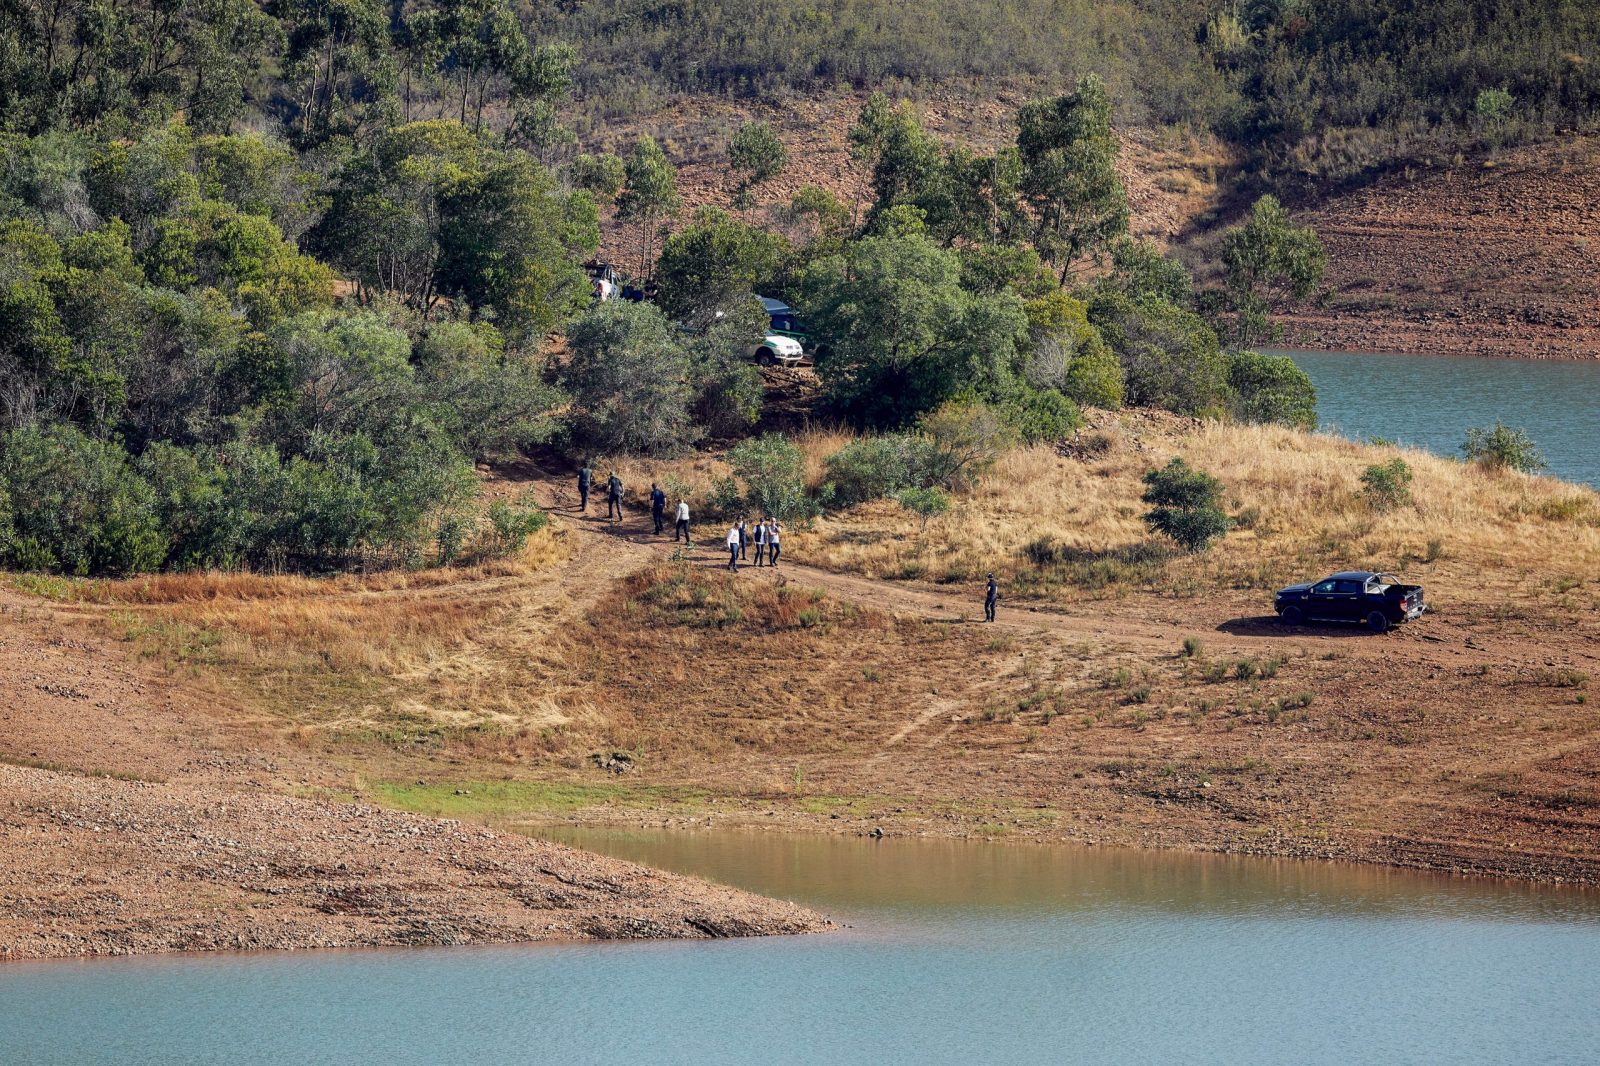 epa10649456 Portuguese authorities during the search operation at the Arade dam area, Faro District, amid the investigation into the disappearance of Madeleine McCann, in Silves, Portugal, 24 May 2023. The operation, which began on 23 May, stems from a European Investigation Order addressed by the German authorities to Portugal and focuses on the Arade dam, located about 50 kilometers from Praia da Luz, where the child disappeared on 03 May 2007 while on vacation with her parents.  EPA/RICARDO NASCIMENTO